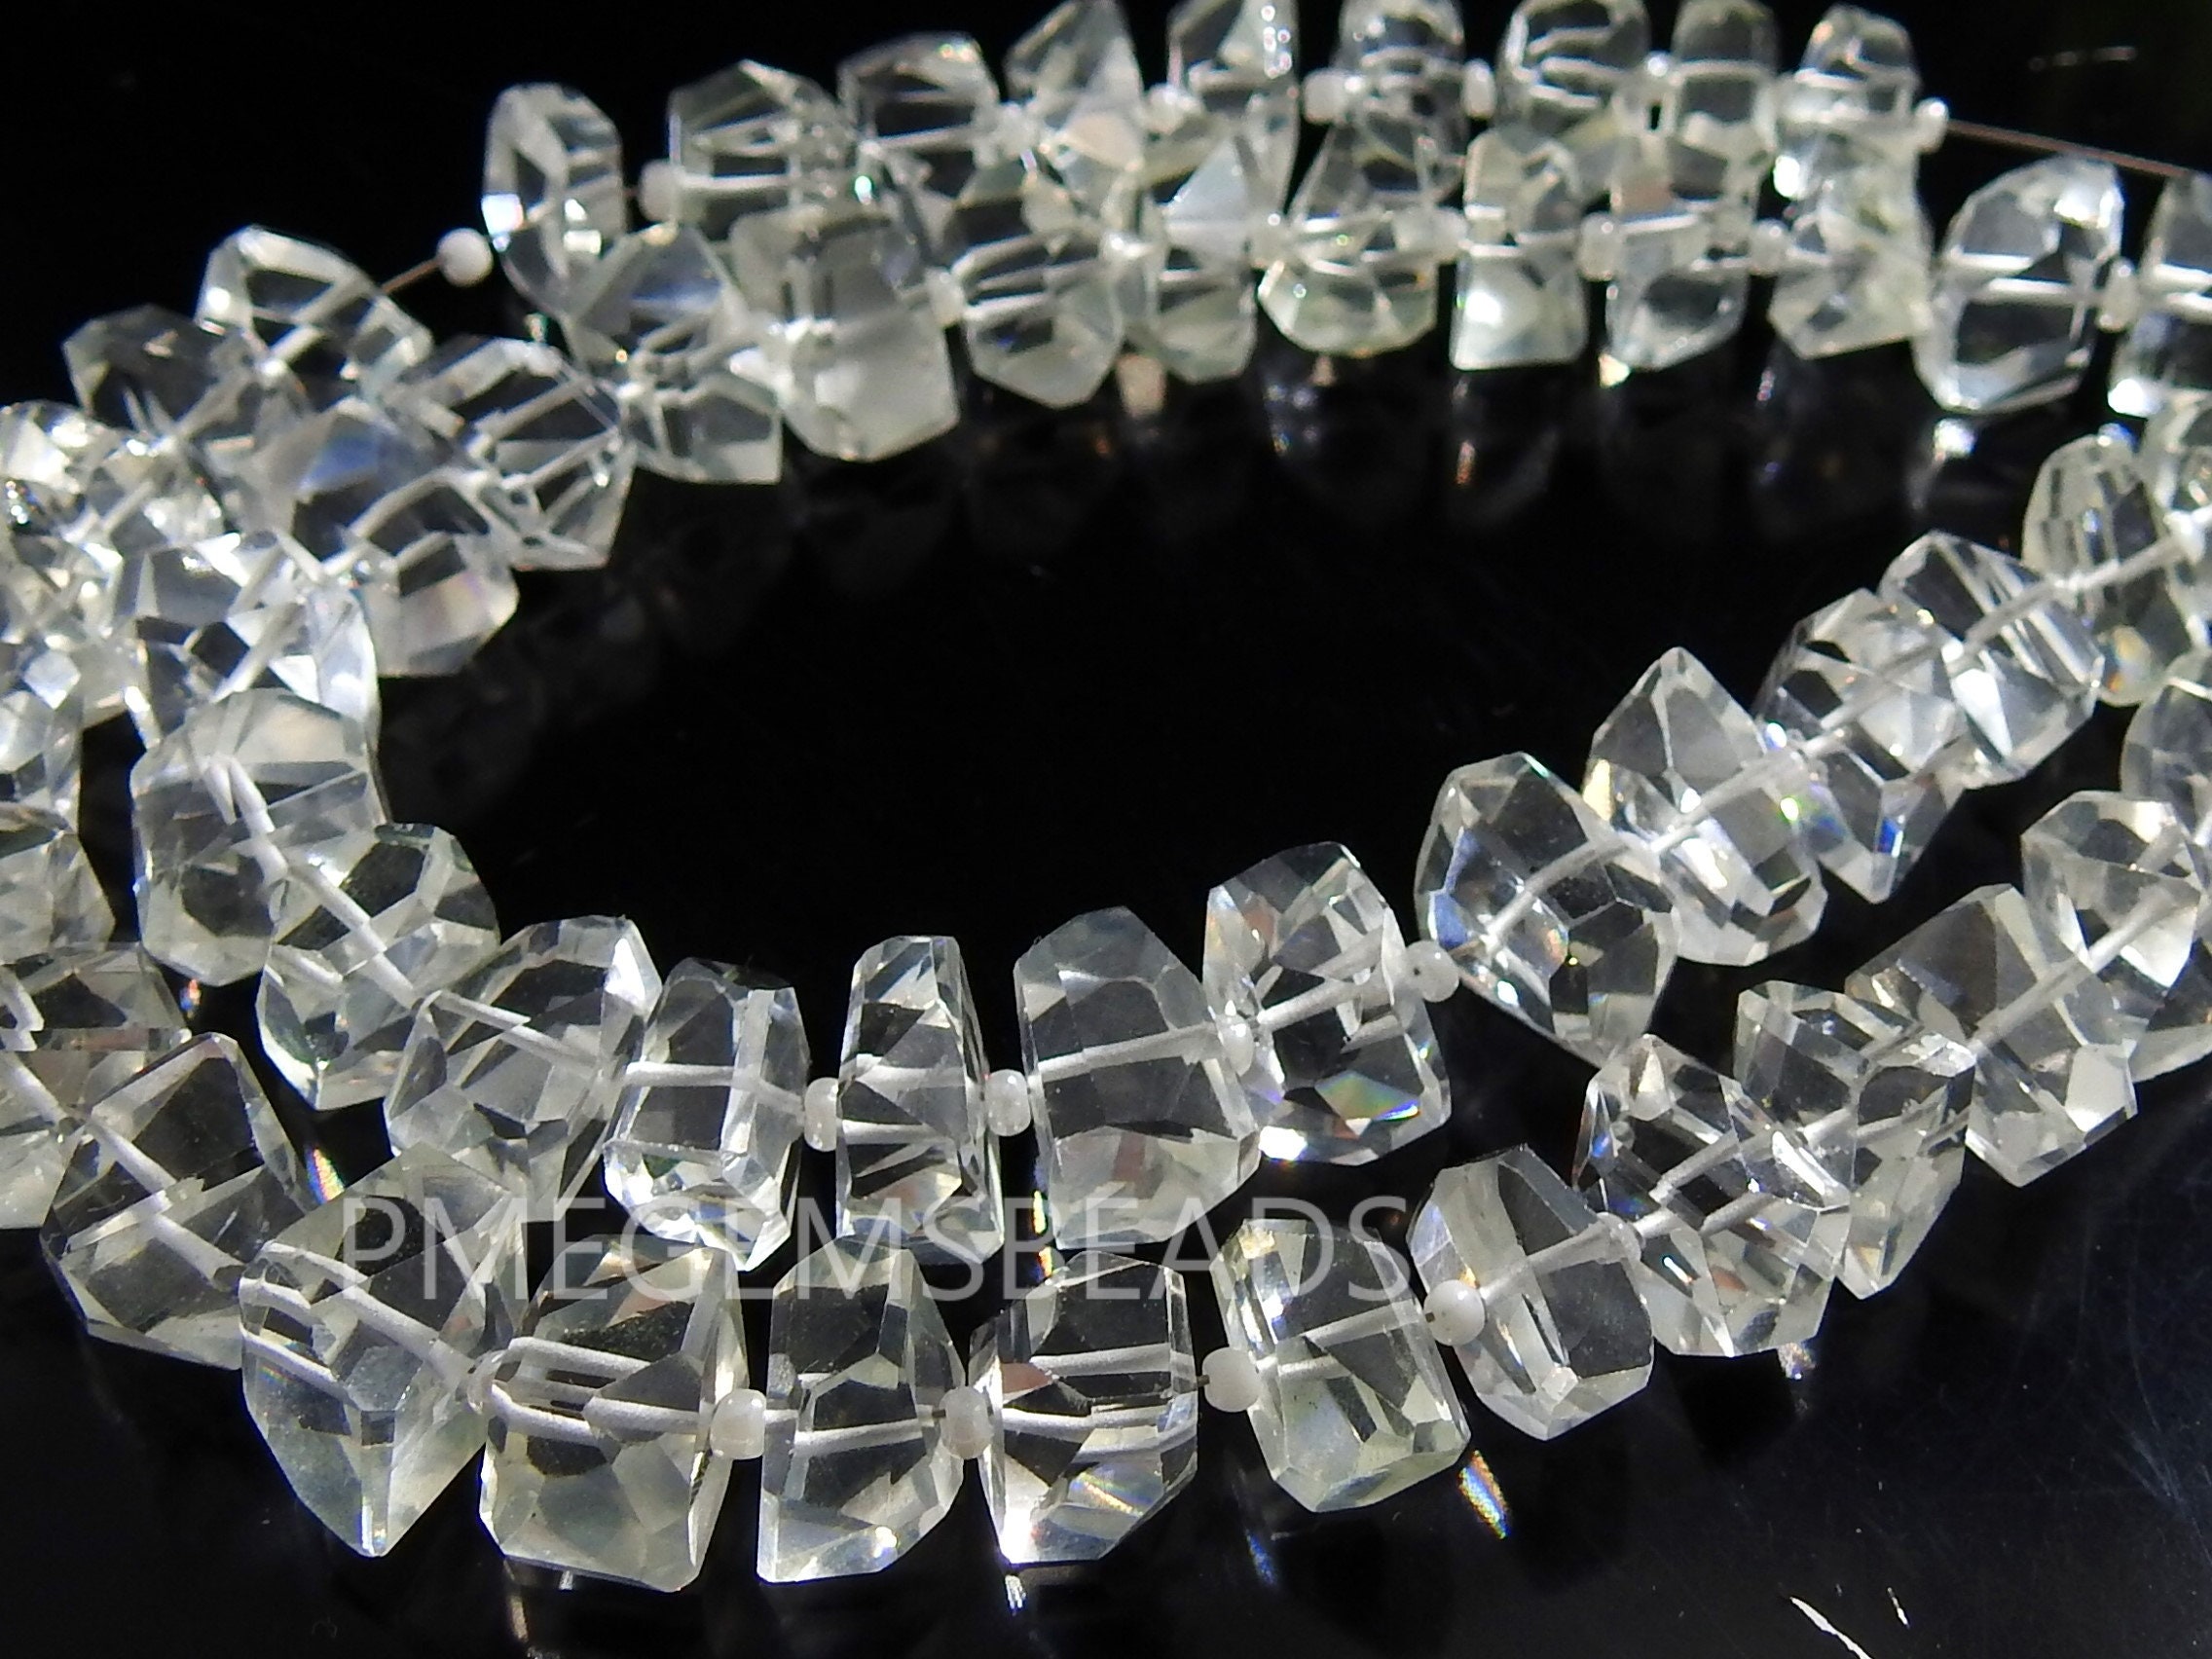 Crystal Clear Hydro Quartz Tumble,Faceted,Nugget,Hydro,Irregular,Loose Stone,For Making Jewelry,Necklace,Bracelet 8Inch 8-10MM Approx (pme) | Save 33% - Rajasthan Living 14